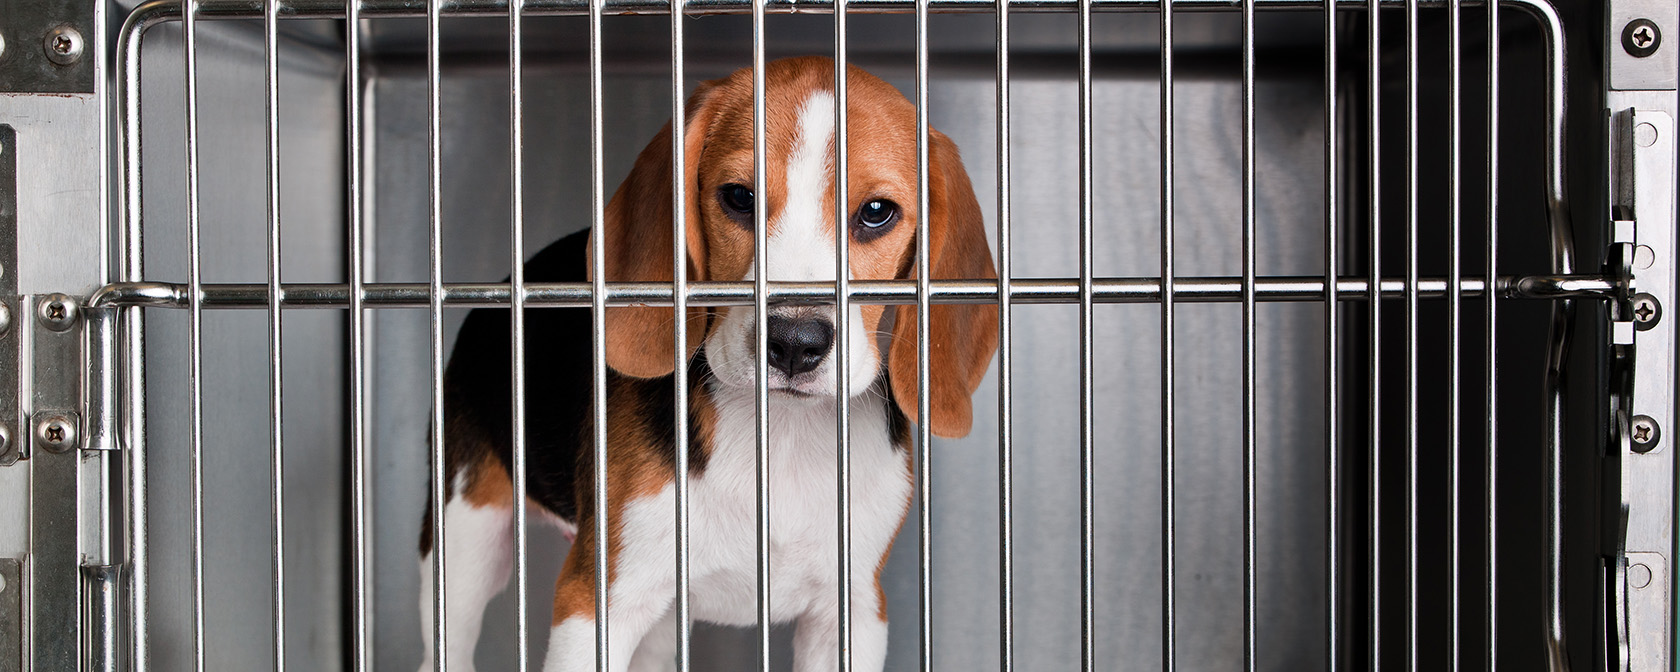 New York state bans cosmetics animal testing, capping off a year of wins for animals in labs